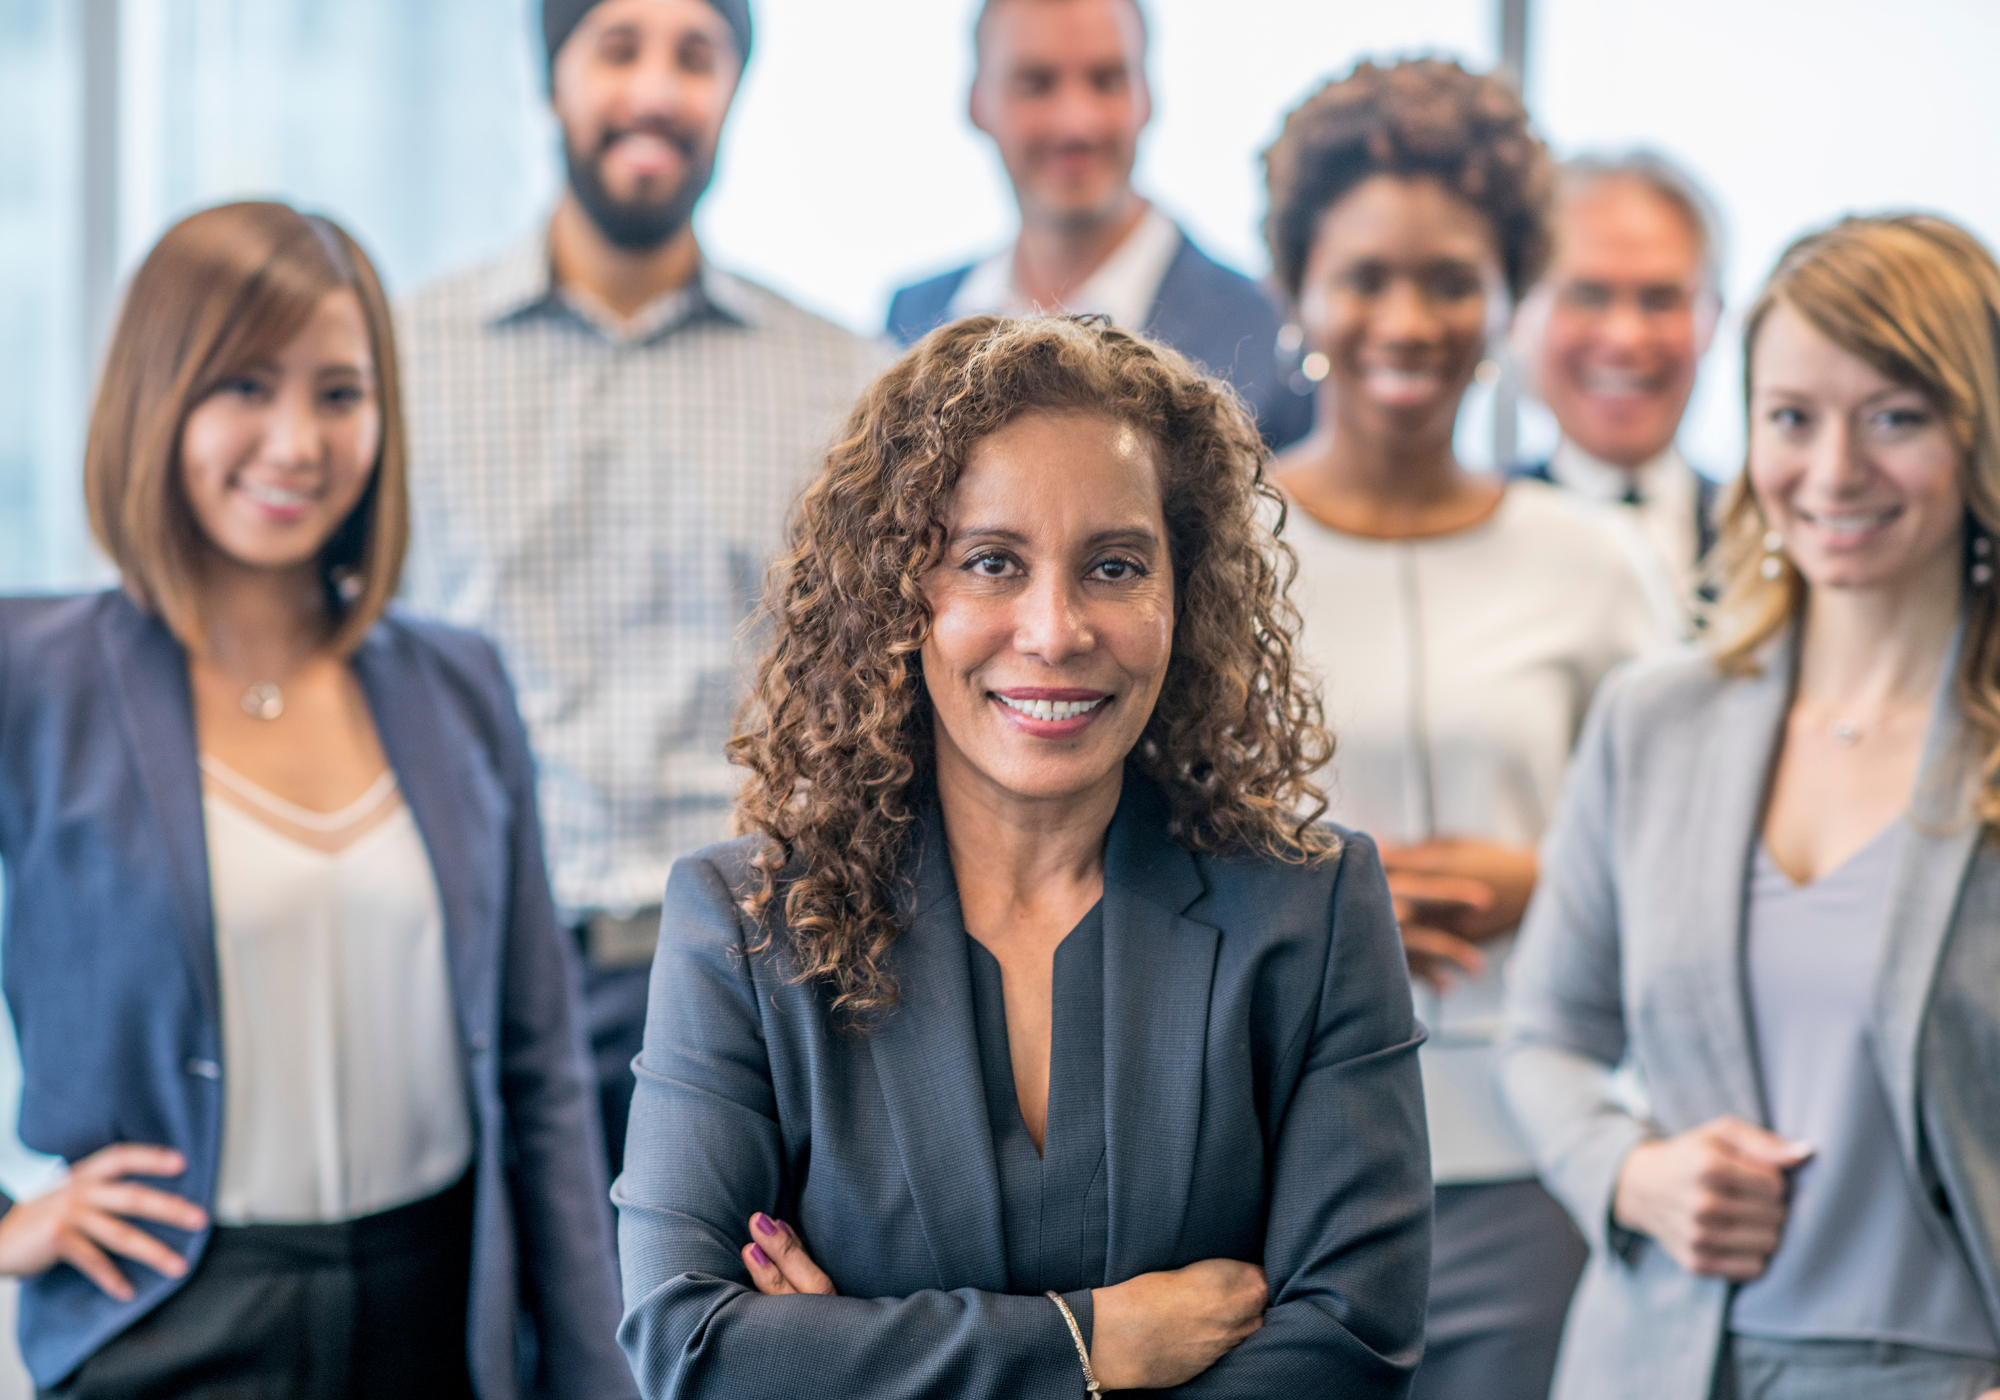 Female CEO smiling and standing in front of her team of experts